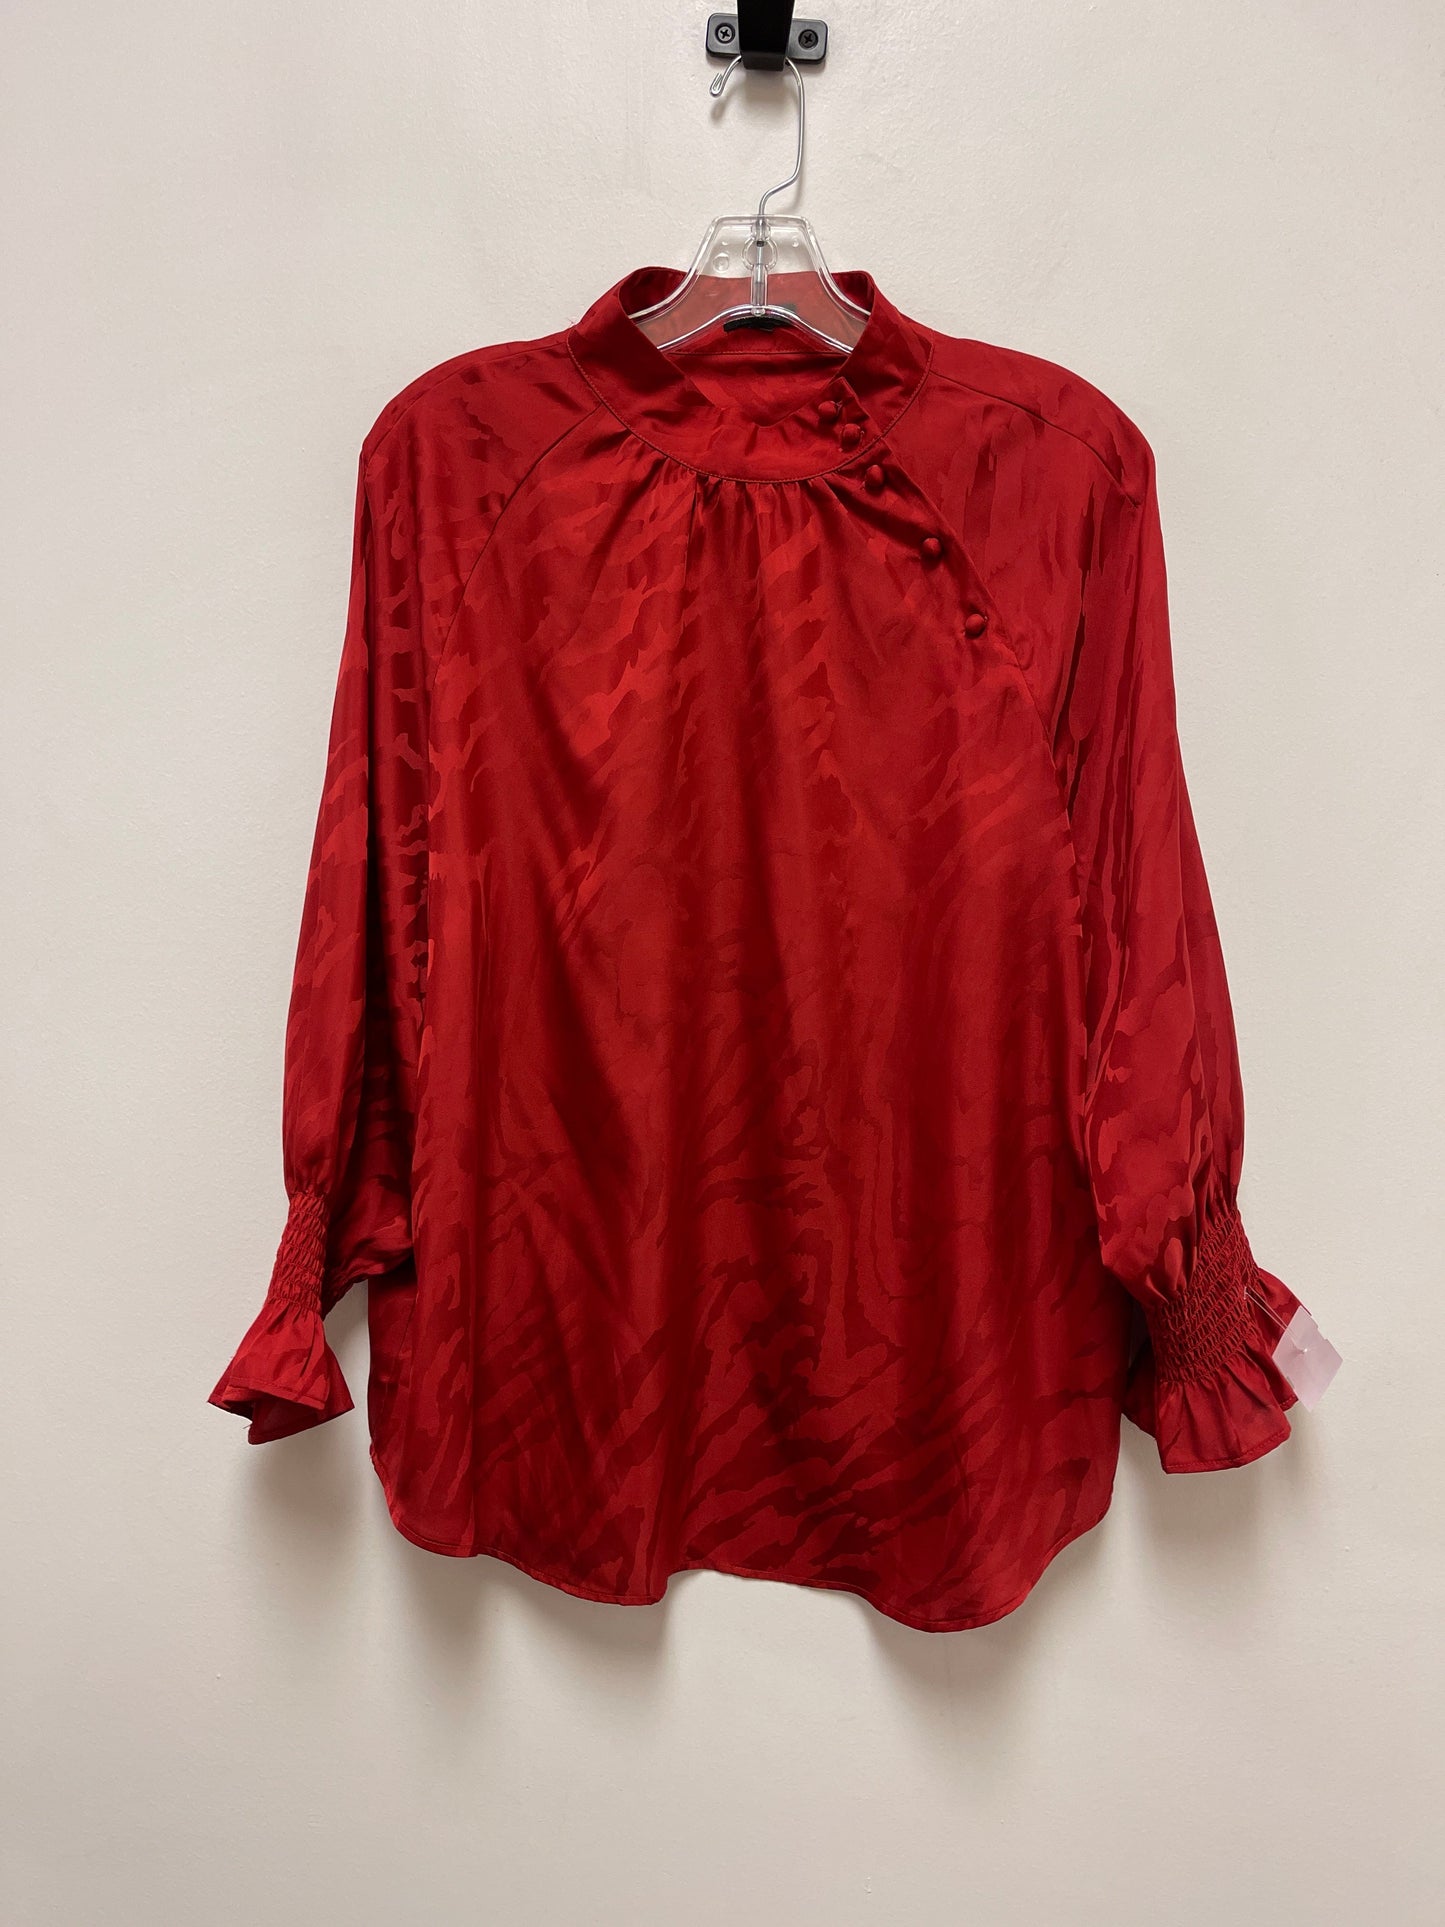 Red Top Long Sleeve Ann Taylor, Size L